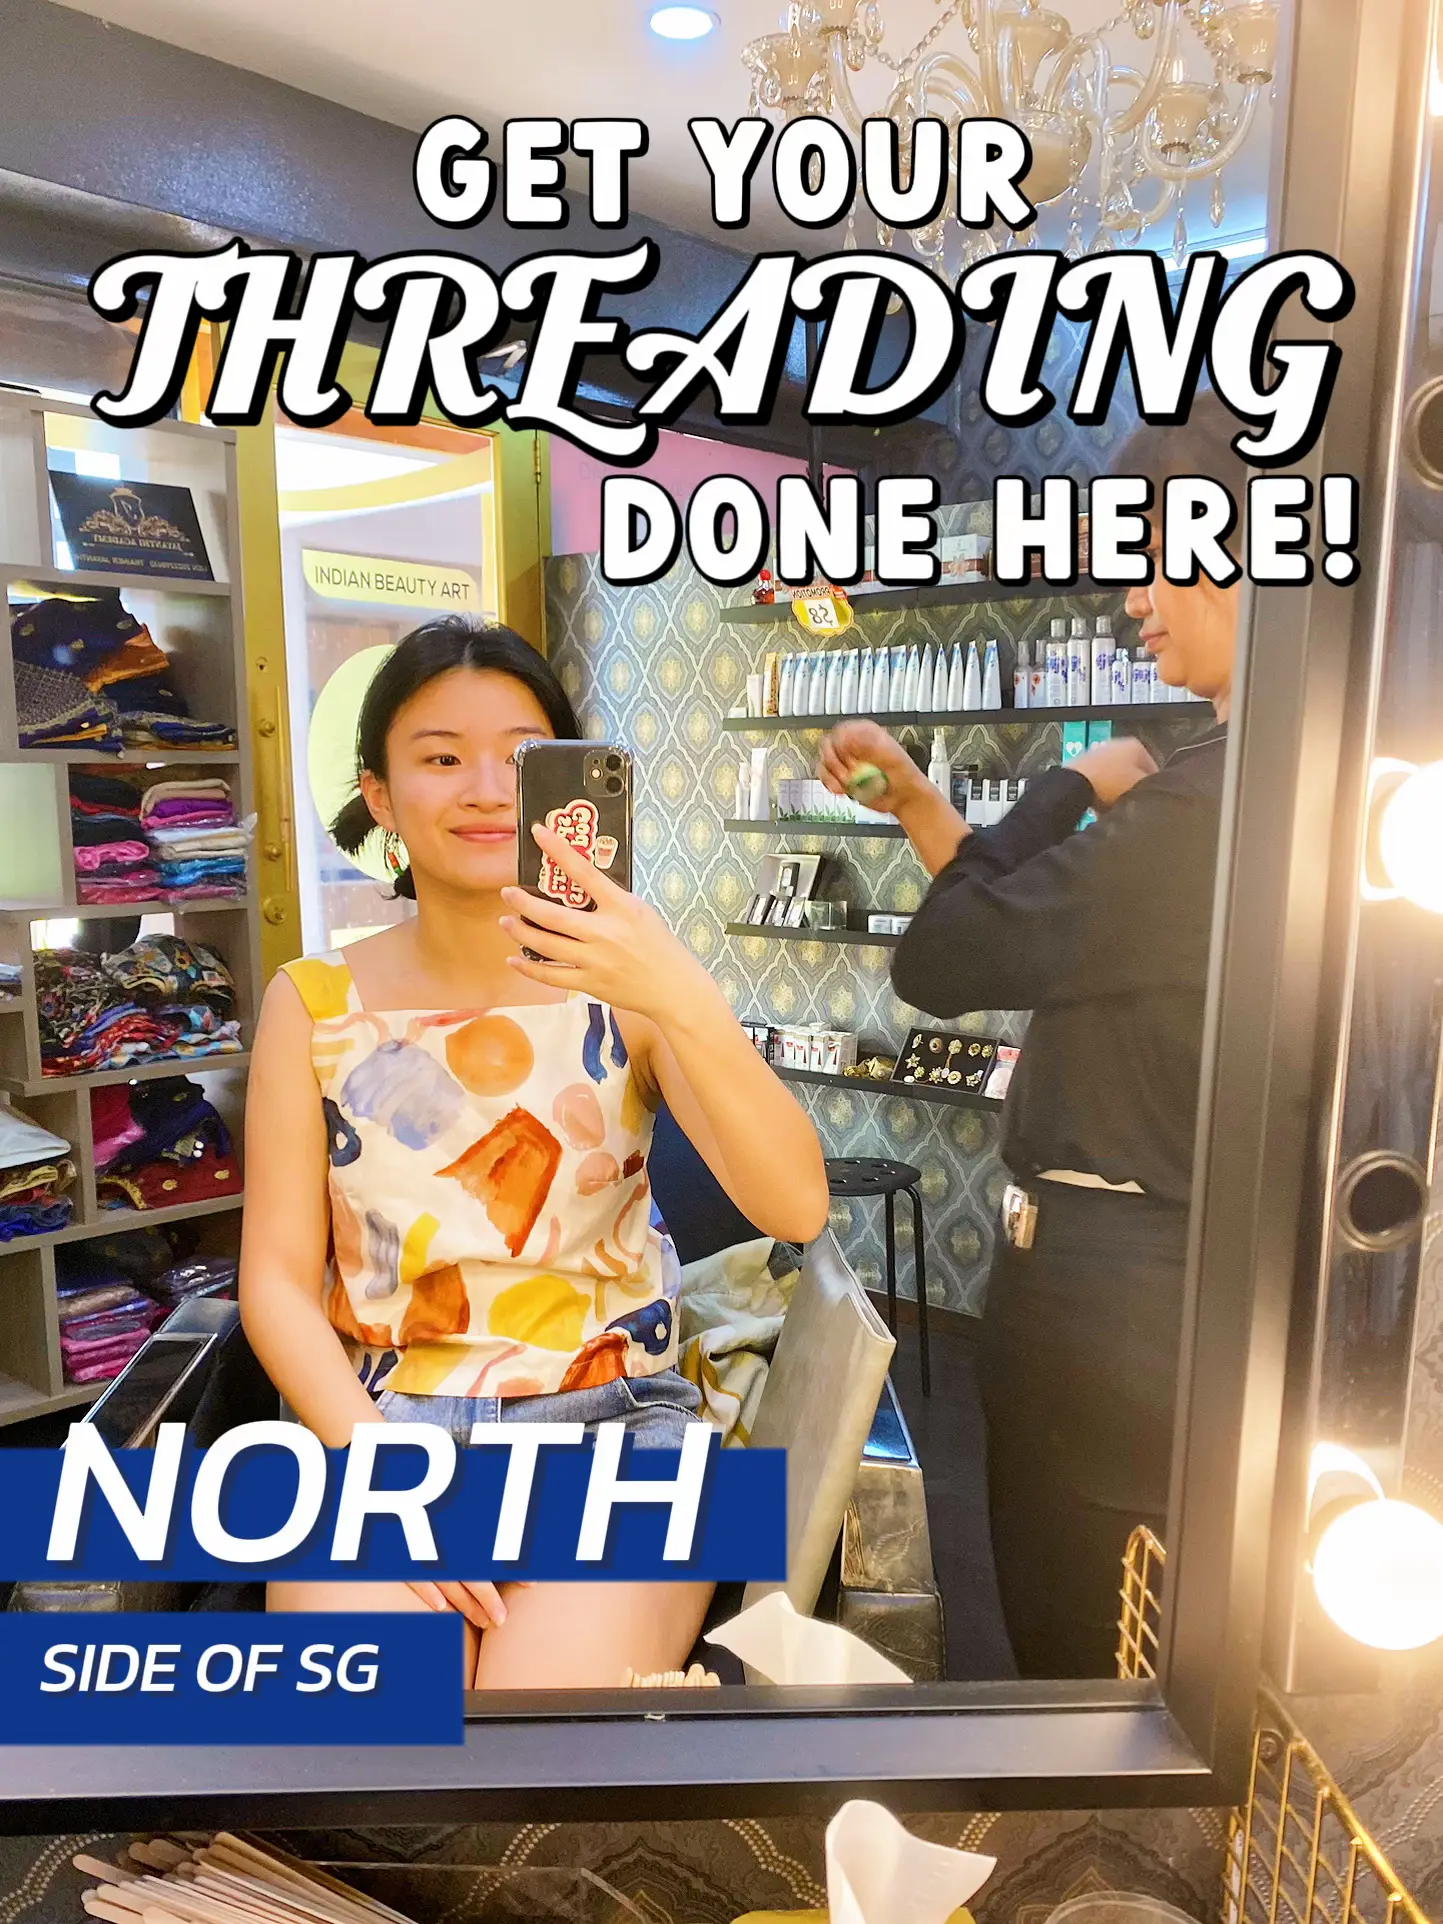 NORTHies! Get your threading done here ✨'s images(0)